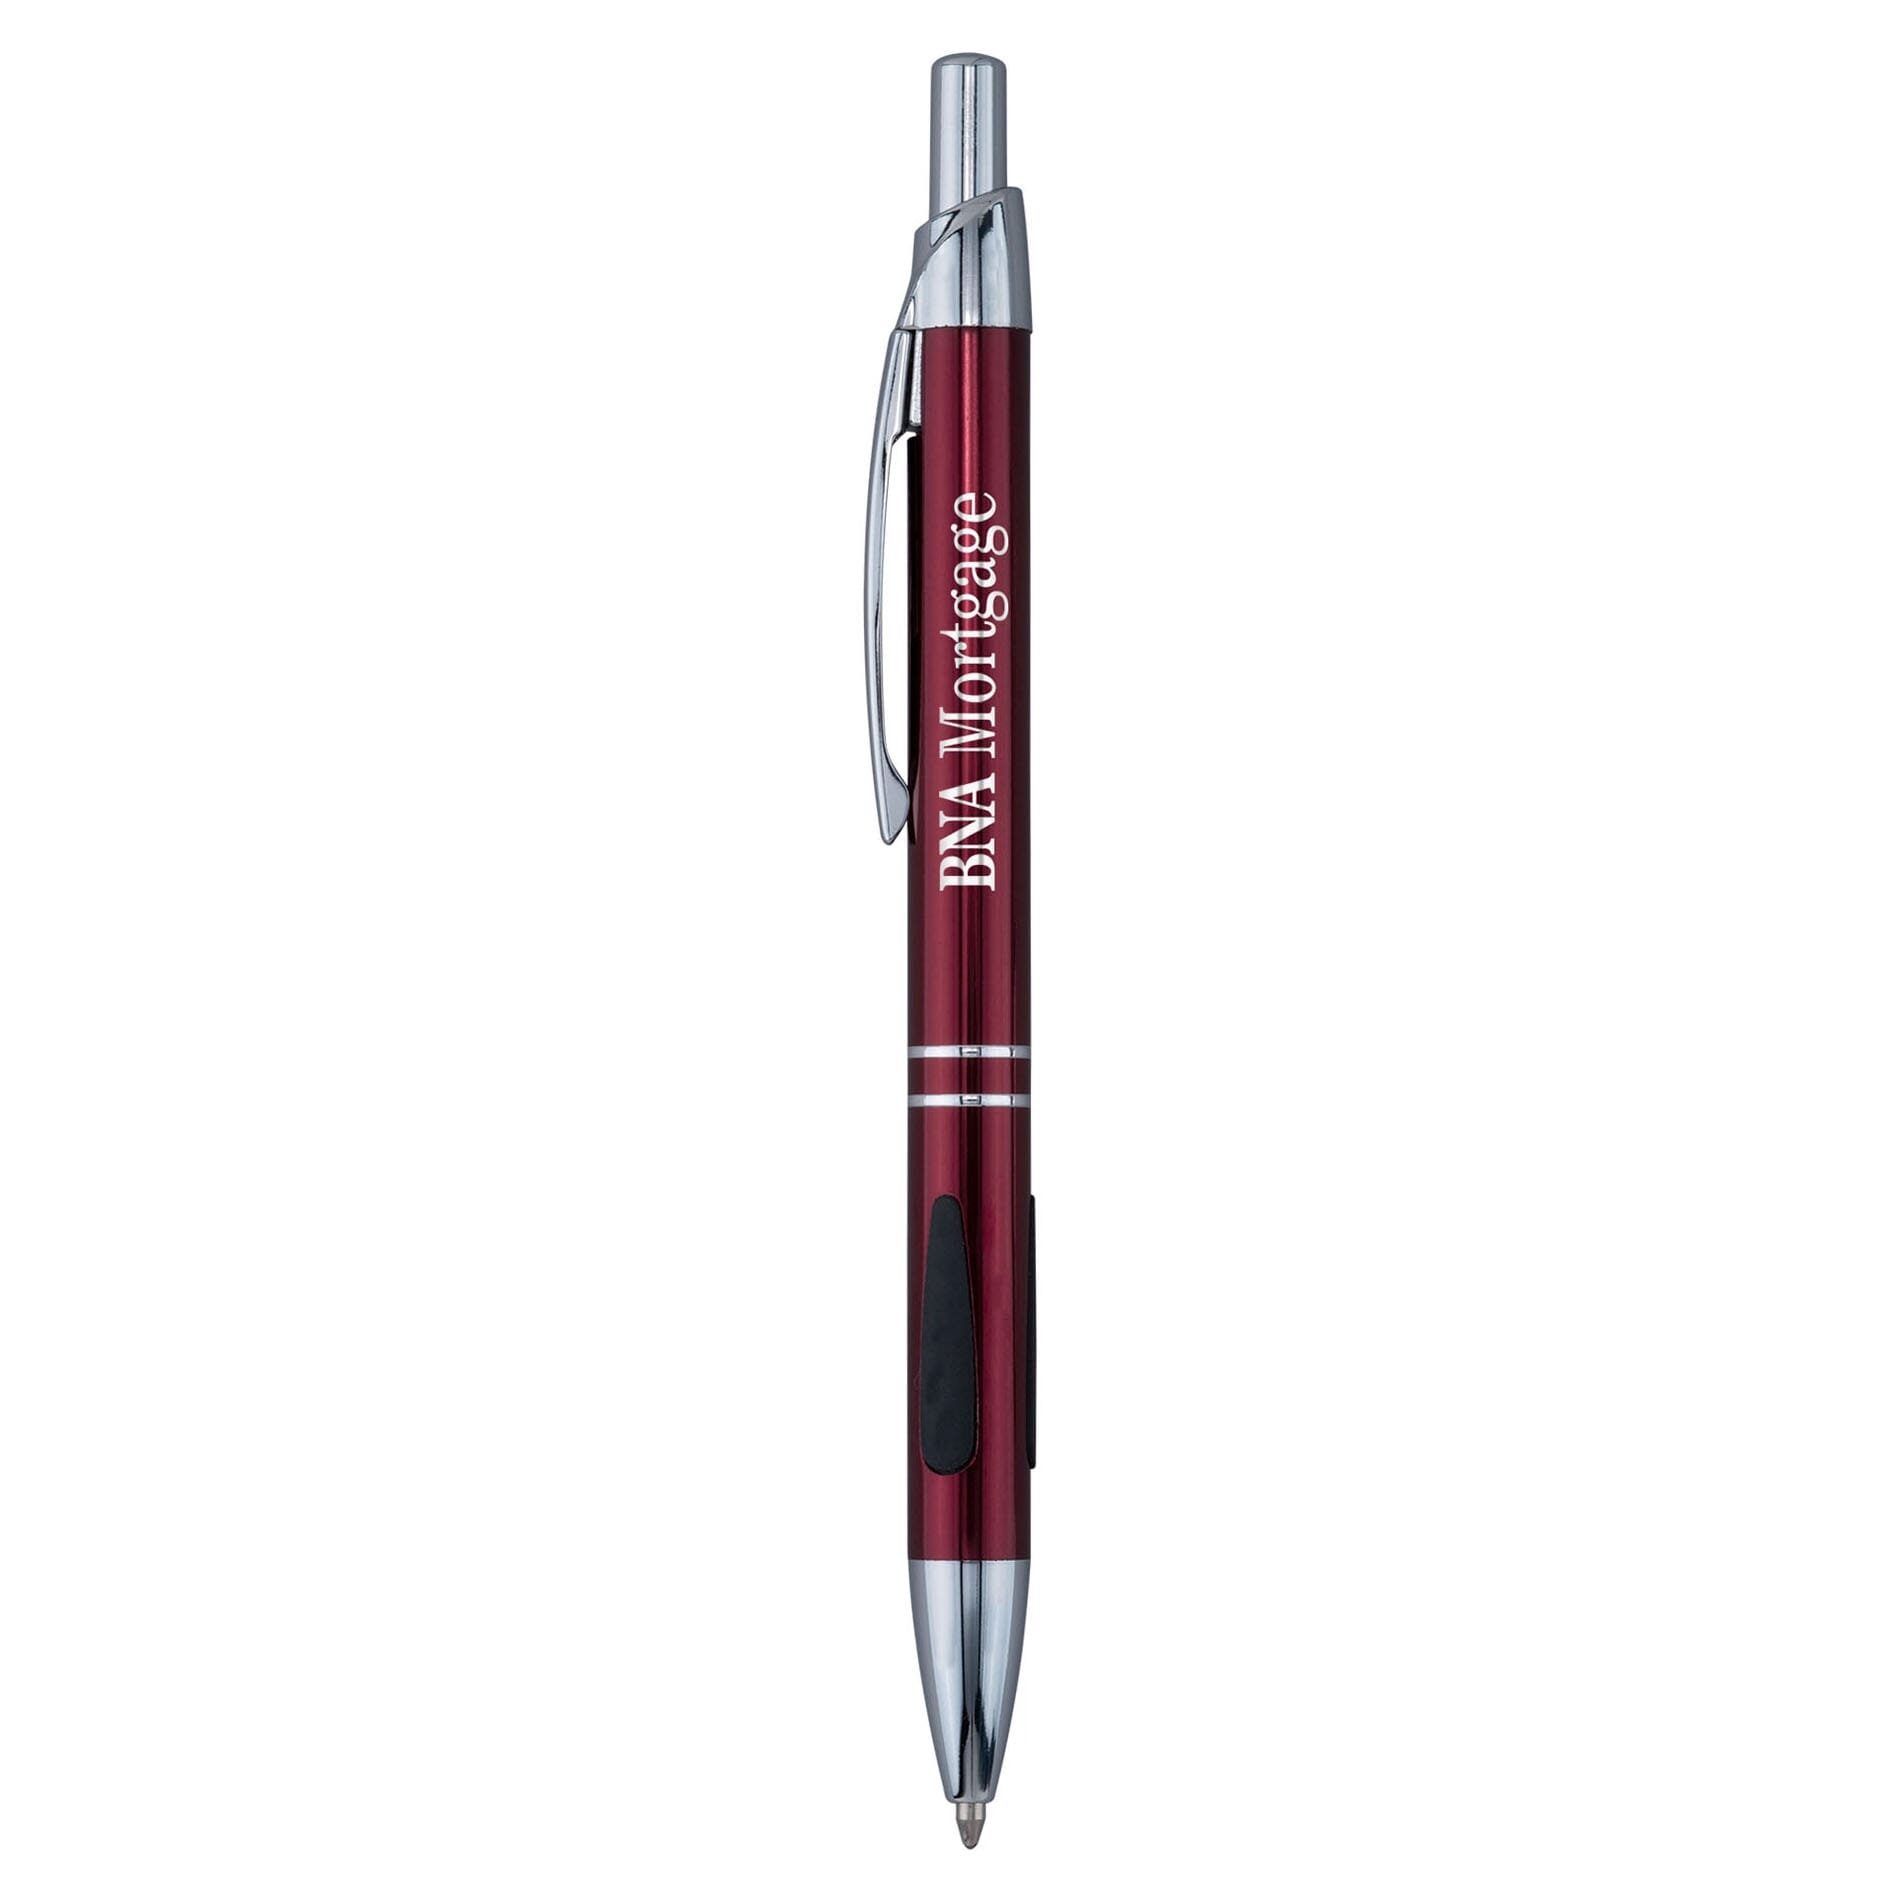 Red metallic pen with company logo